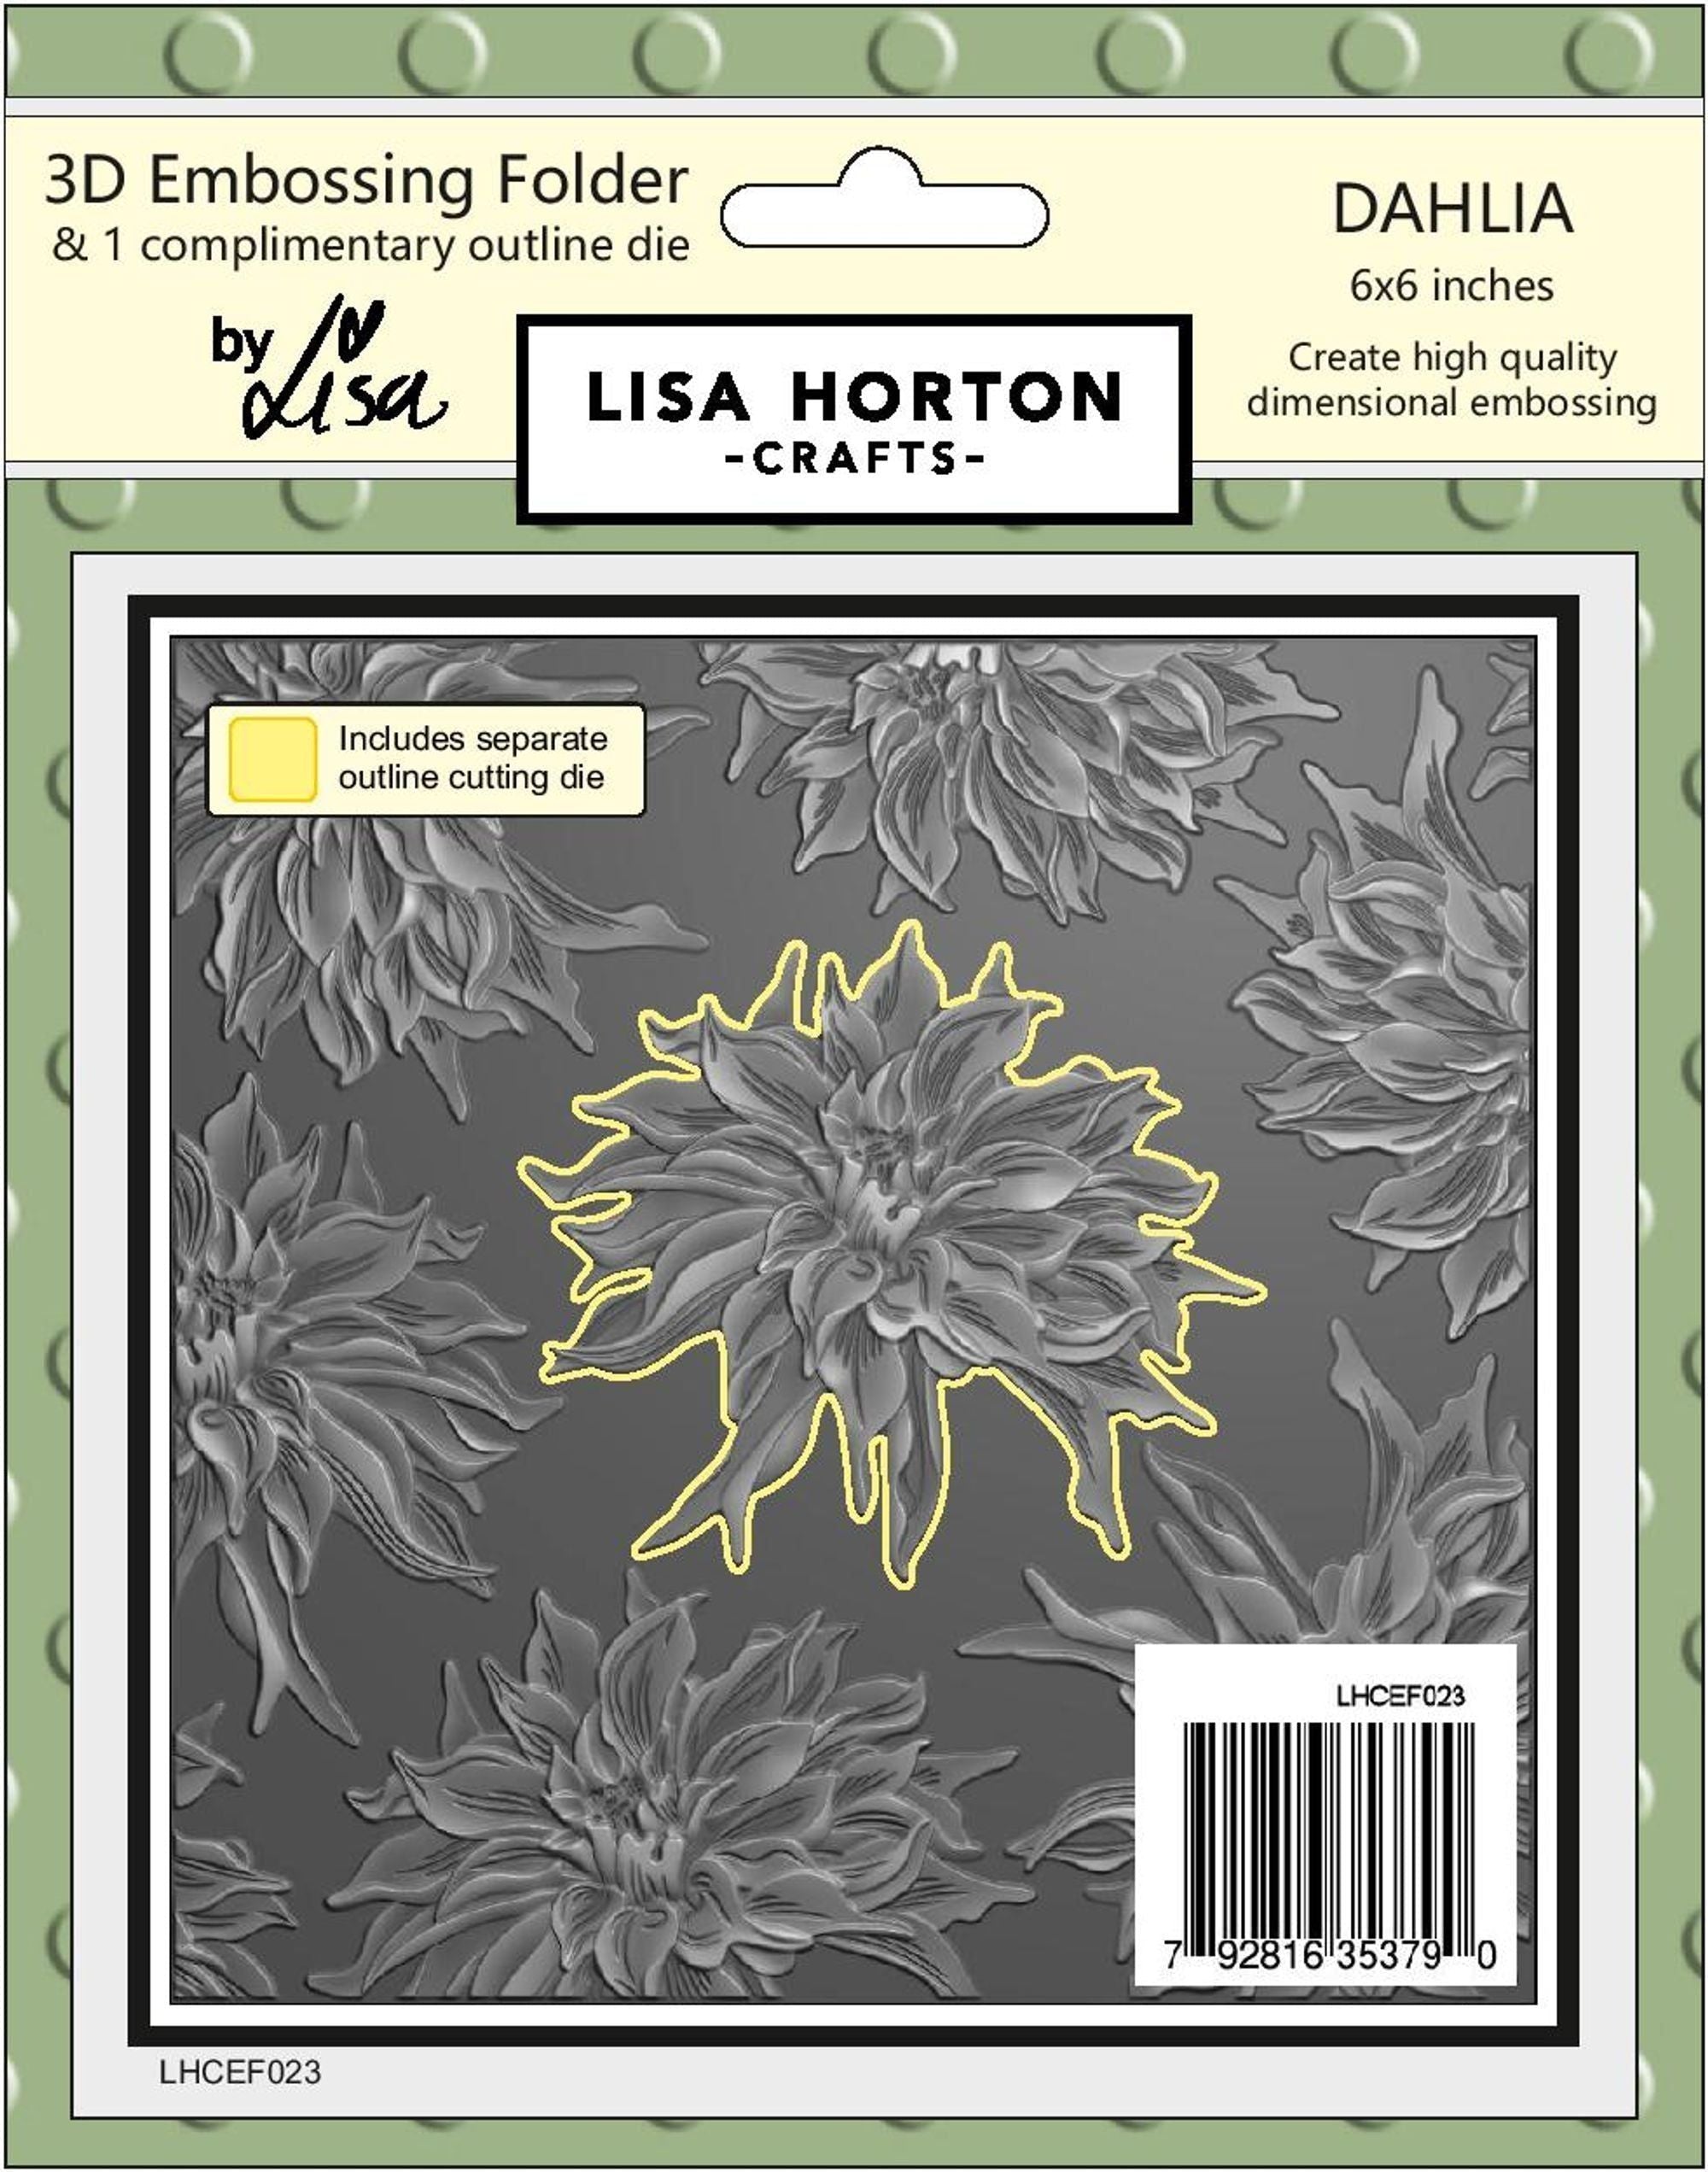 Dahlia 6x6 3D Embossing Folder With Cutting Die